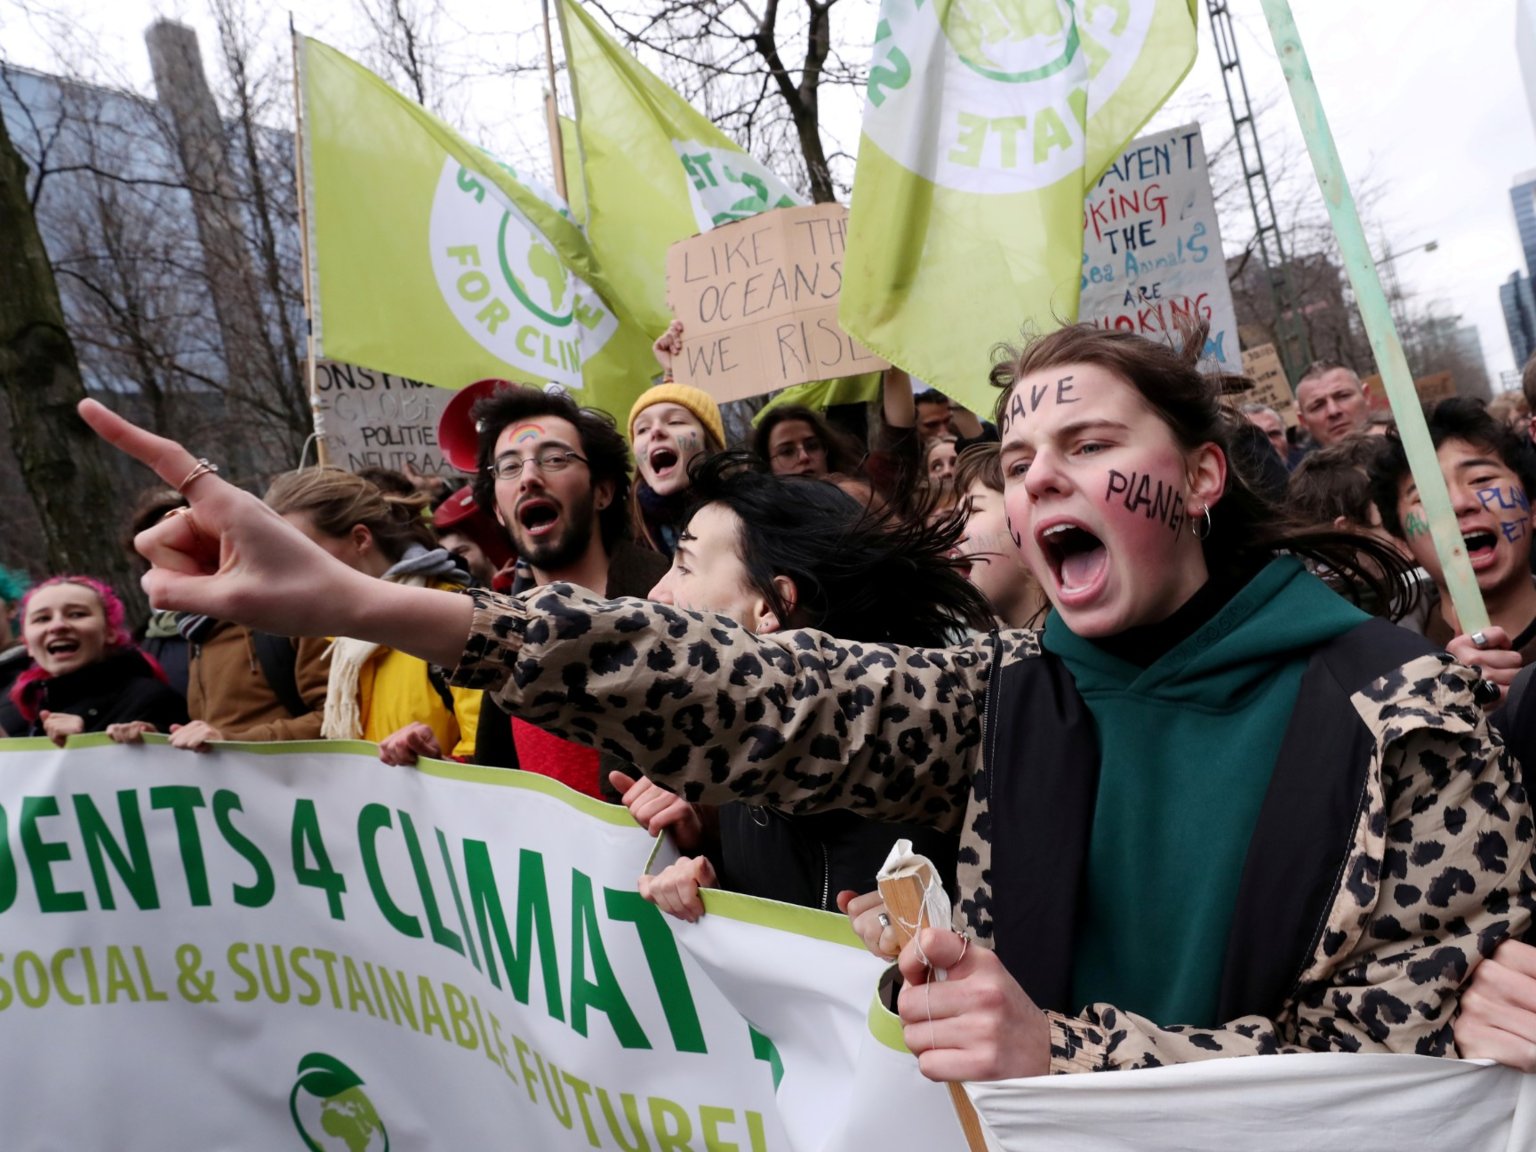 Demonstrators take part in a protest against climate change in central Brussels, Belgium March 15, 2019. Yves Herman/Reuters